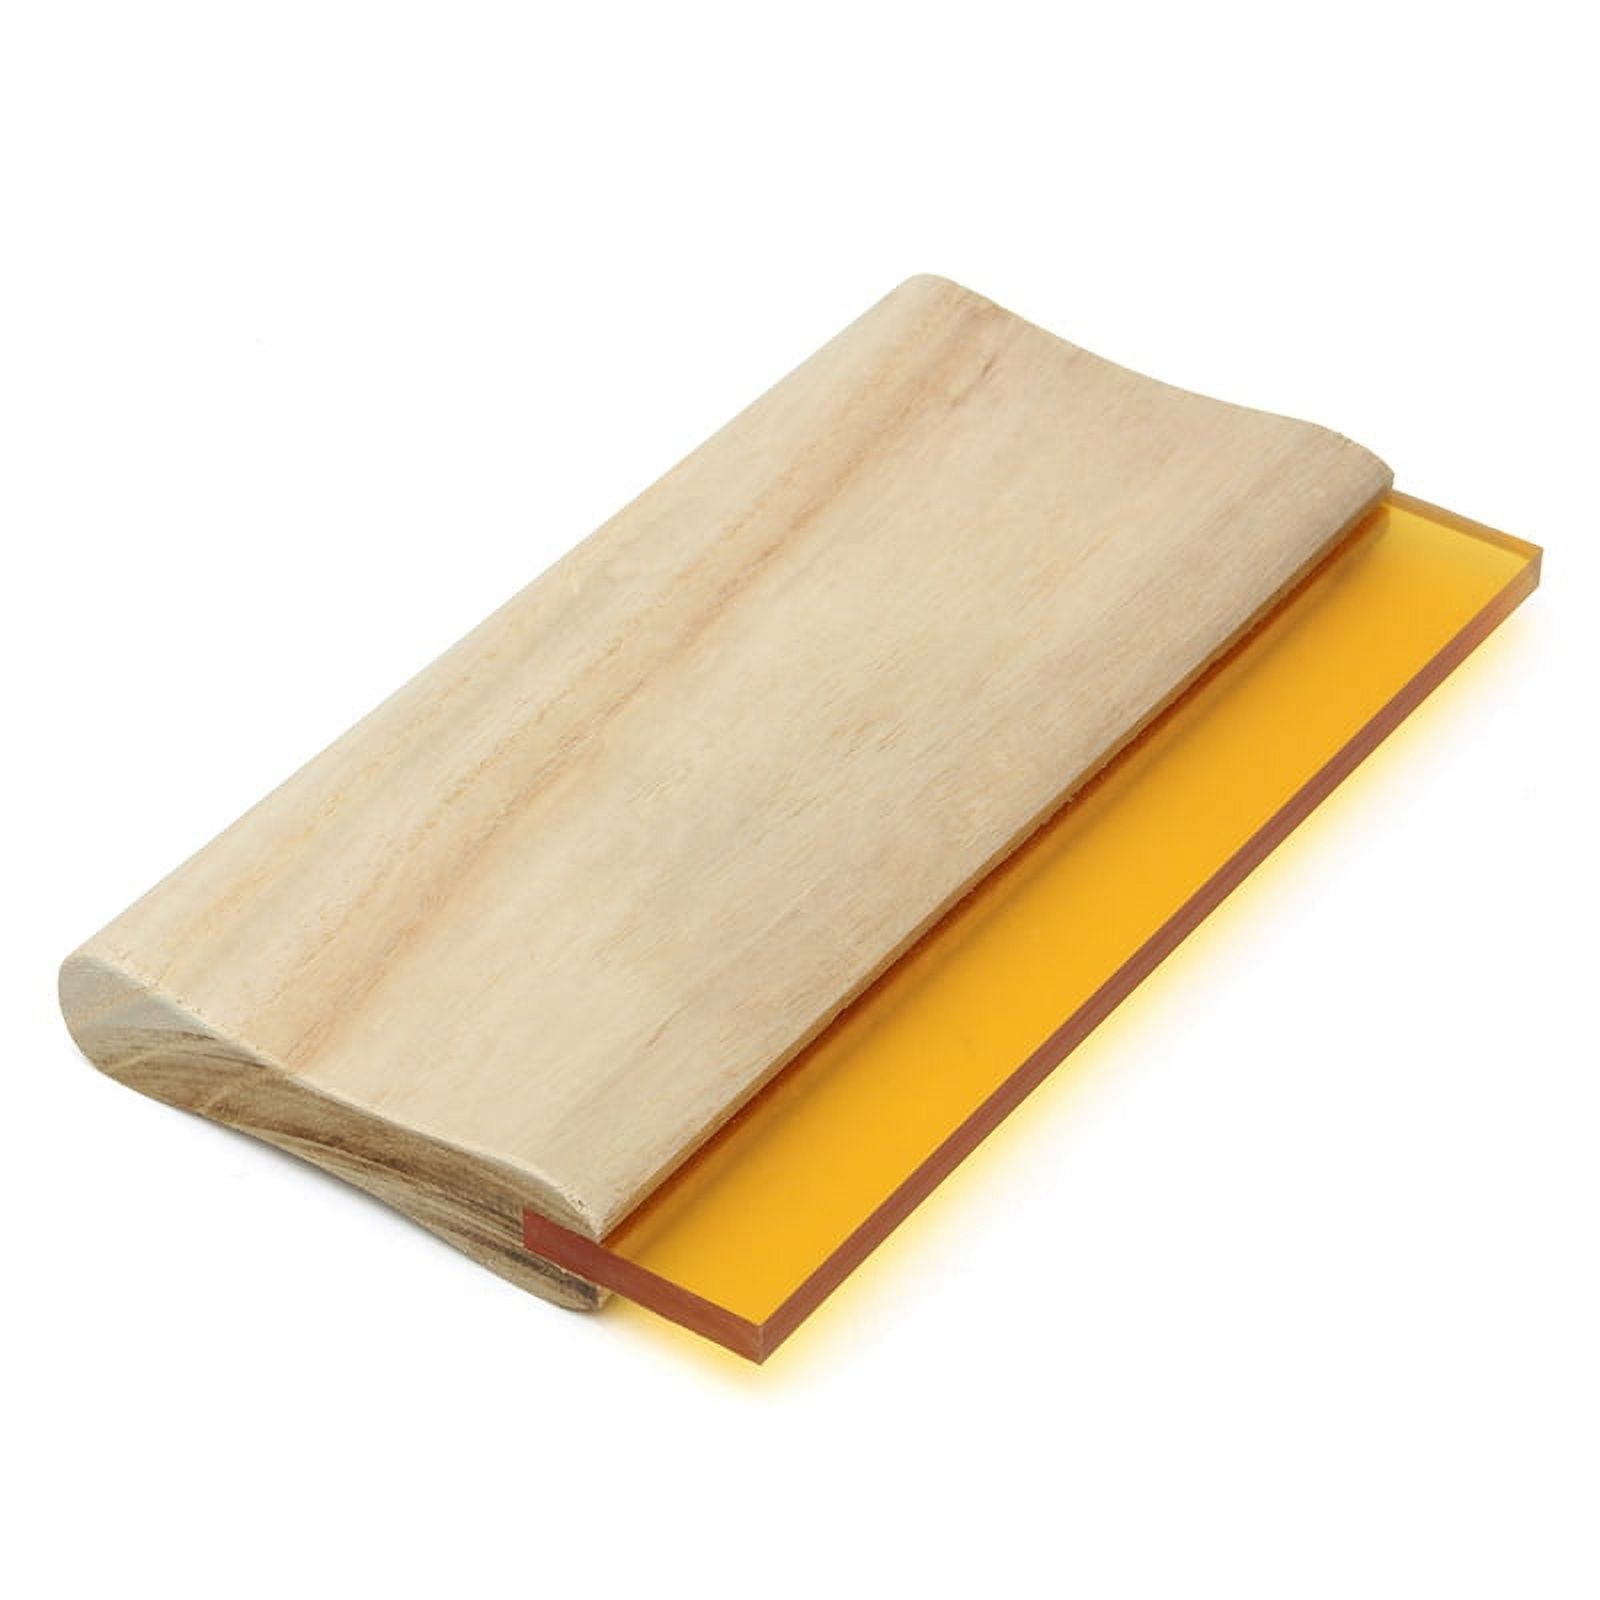 Squeegee Rubber for Screen Printing - Single Durometer